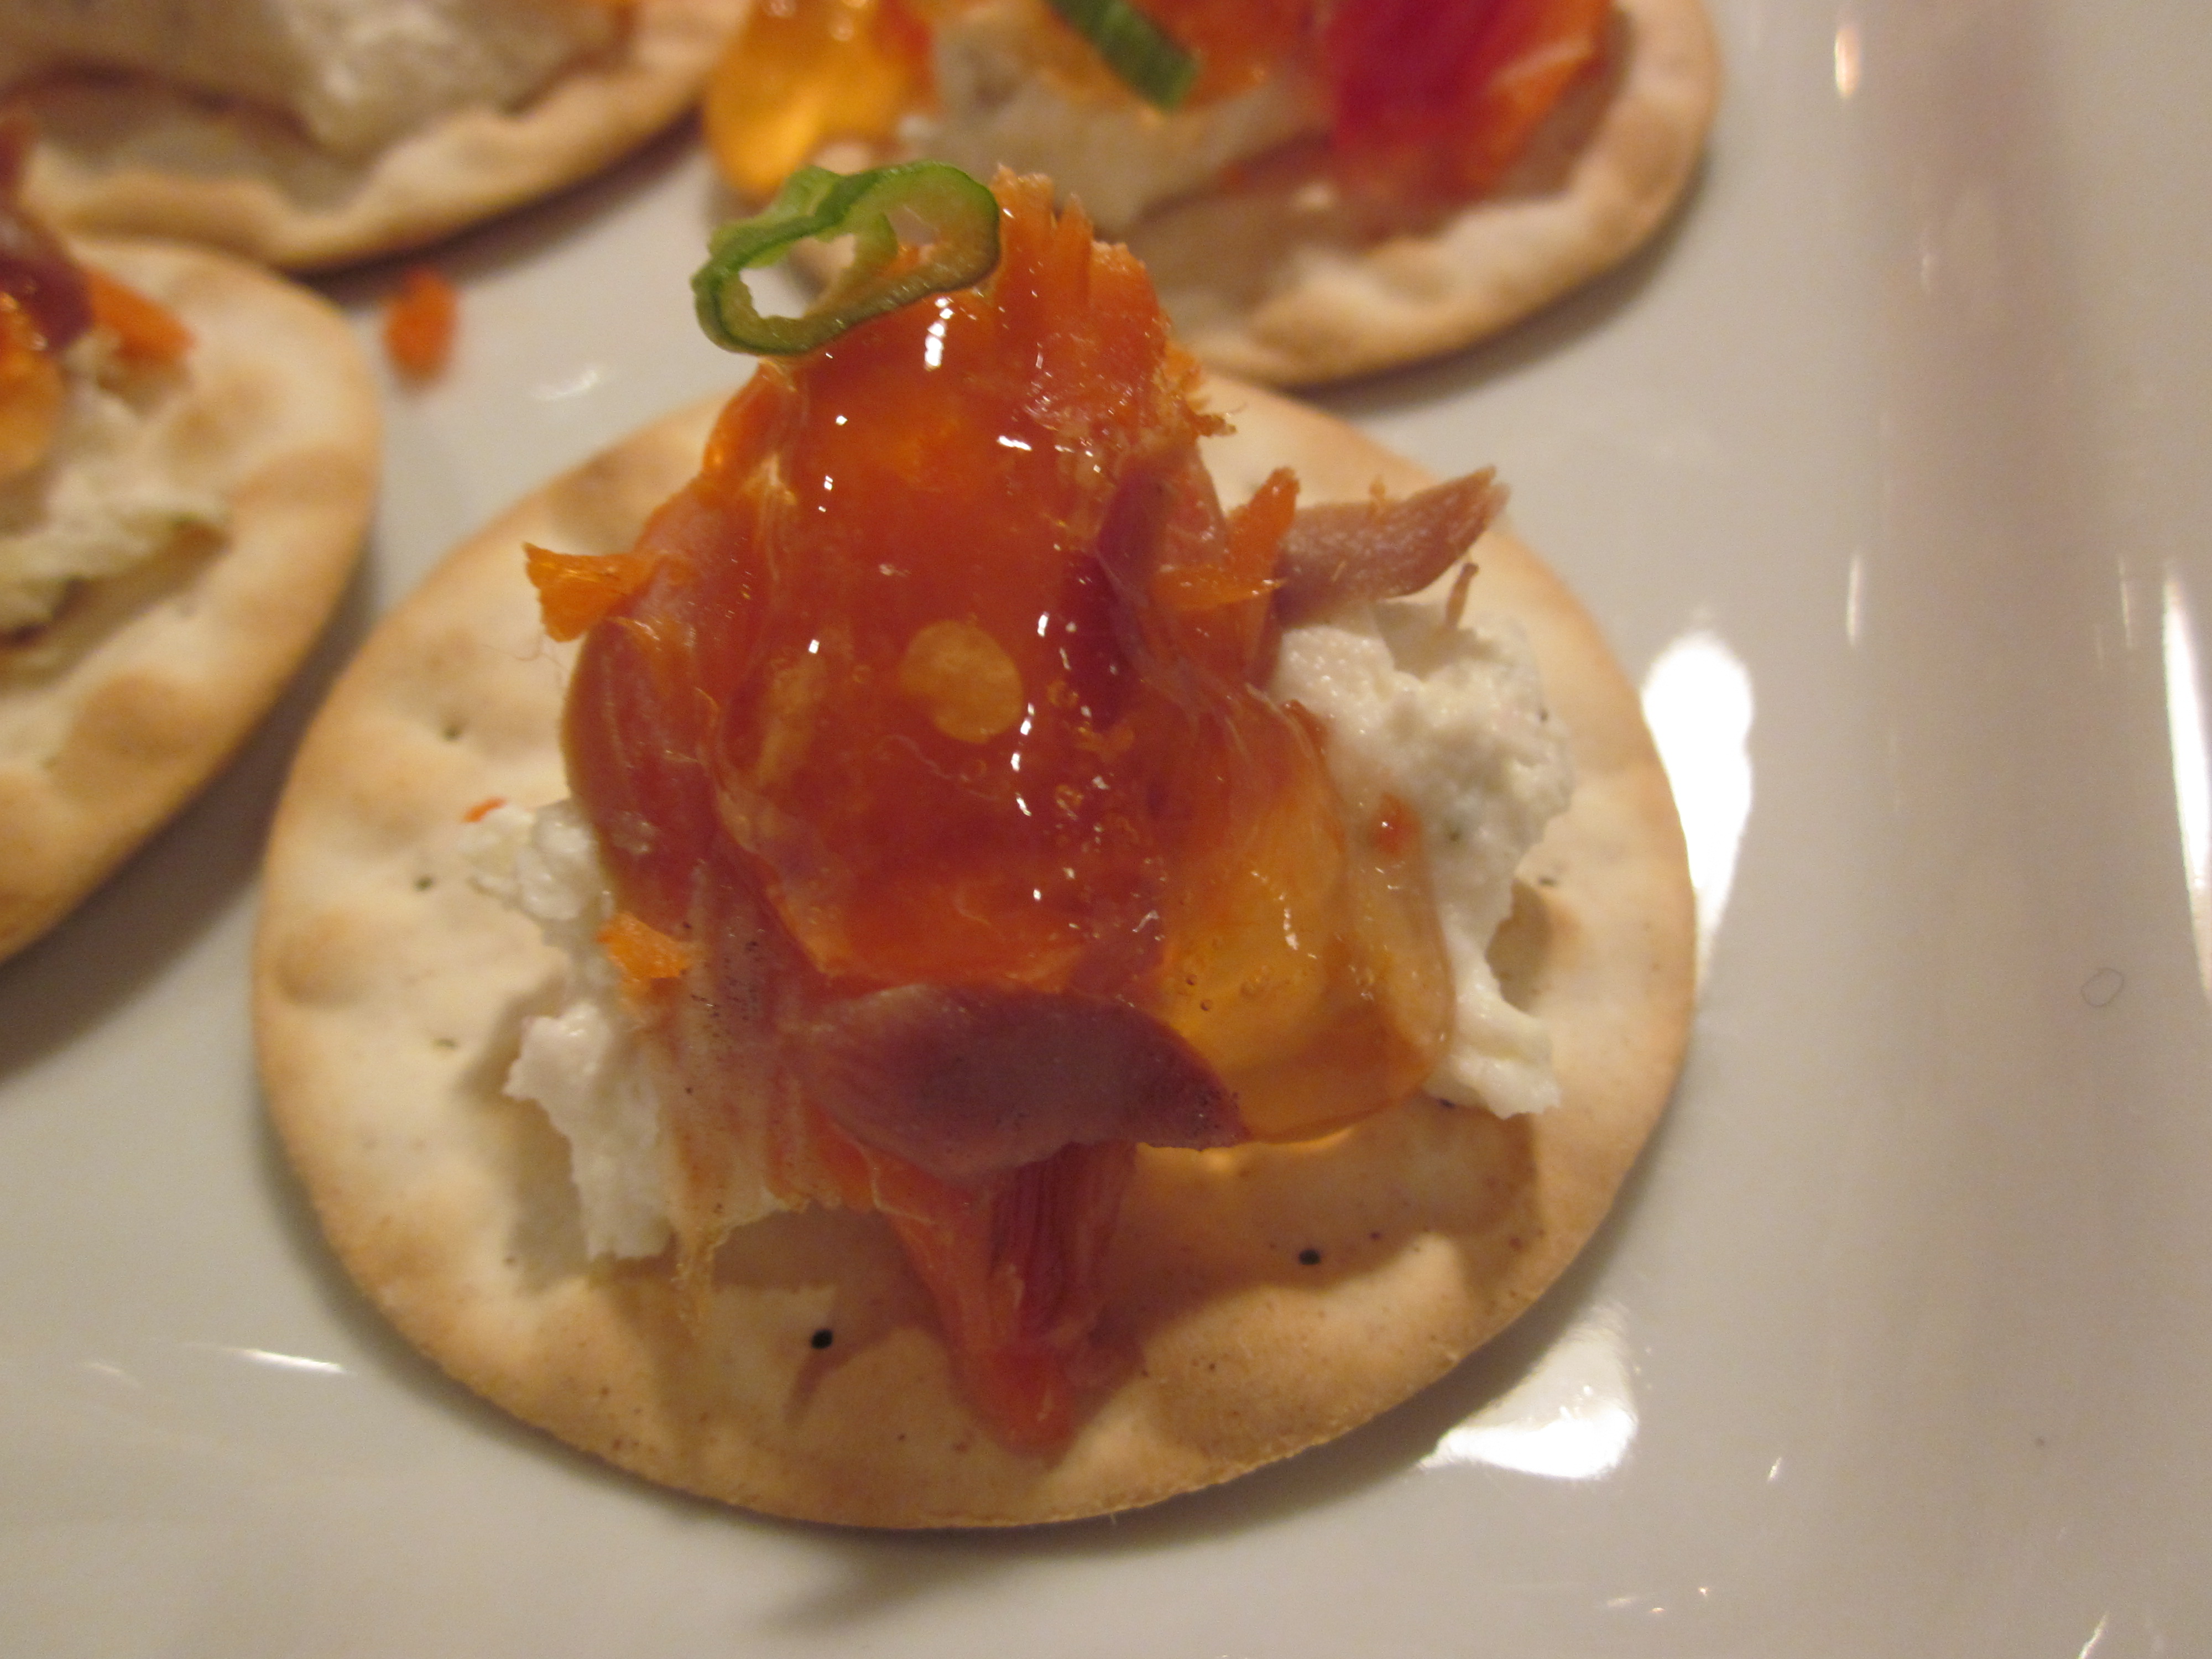 Cold smoked salmon with whipped shallot spread and pepper jelly